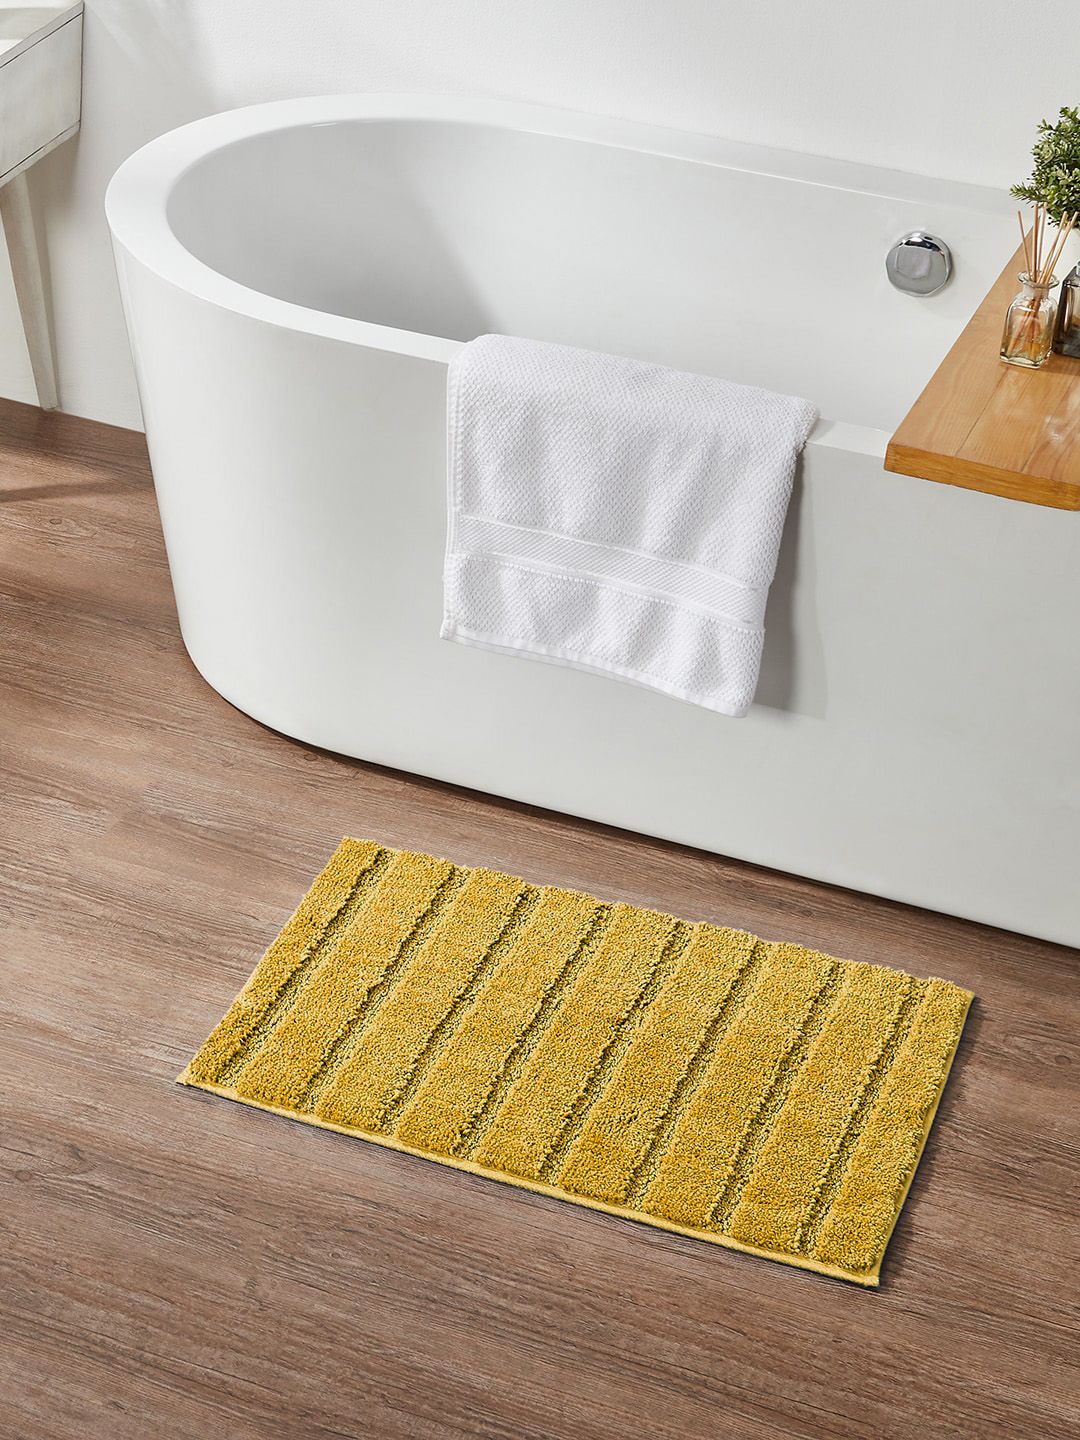 Pano Gold-Coloured Solid 1600 GSM Anti-Slip Bath Mat Price in India